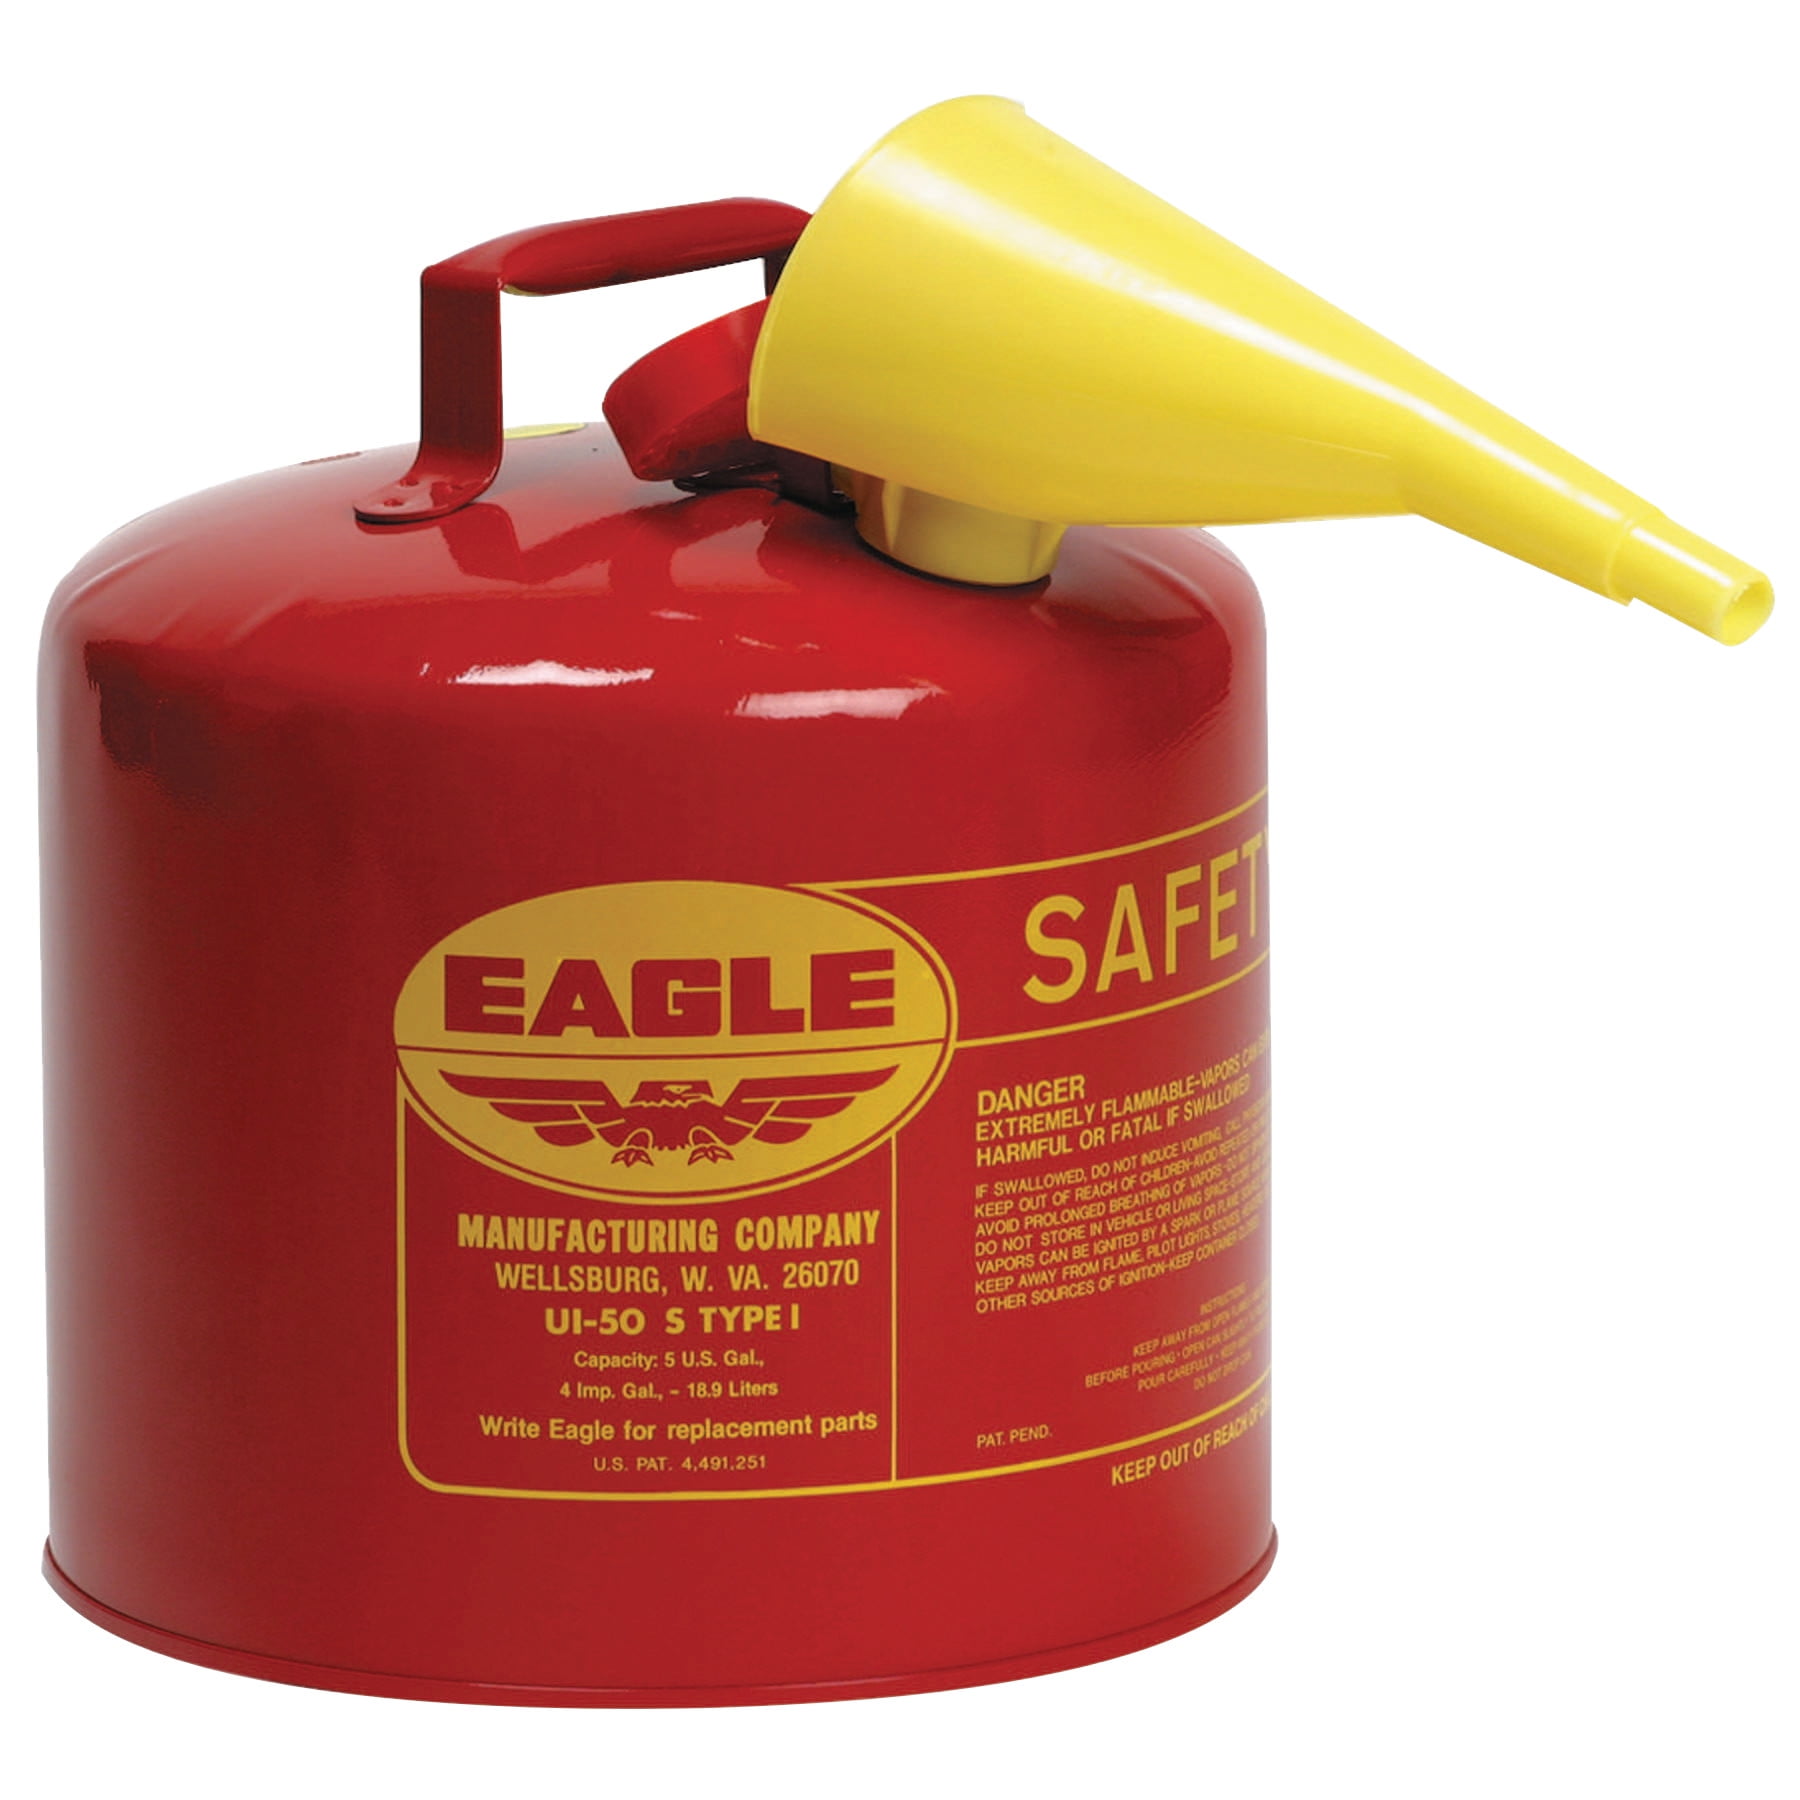 Eagle 1/4 Gallon Galvanized Red Steel Safety Can Ui-2s Type 1 Bright Color for sale online 